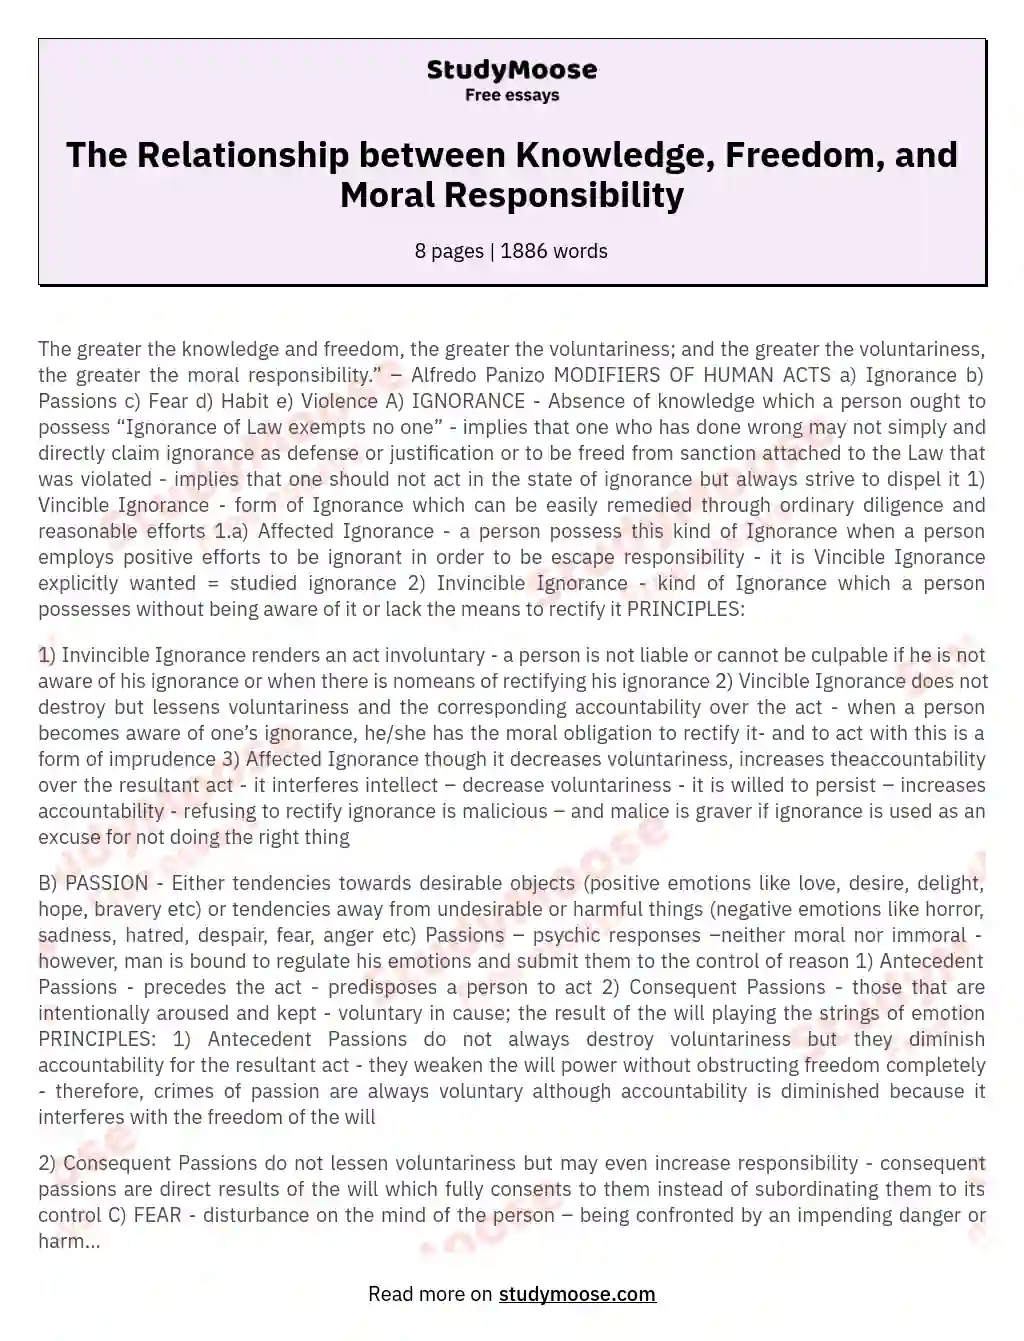 The Relationship between Knowledge, Freedom, and Moral Responsibility essay